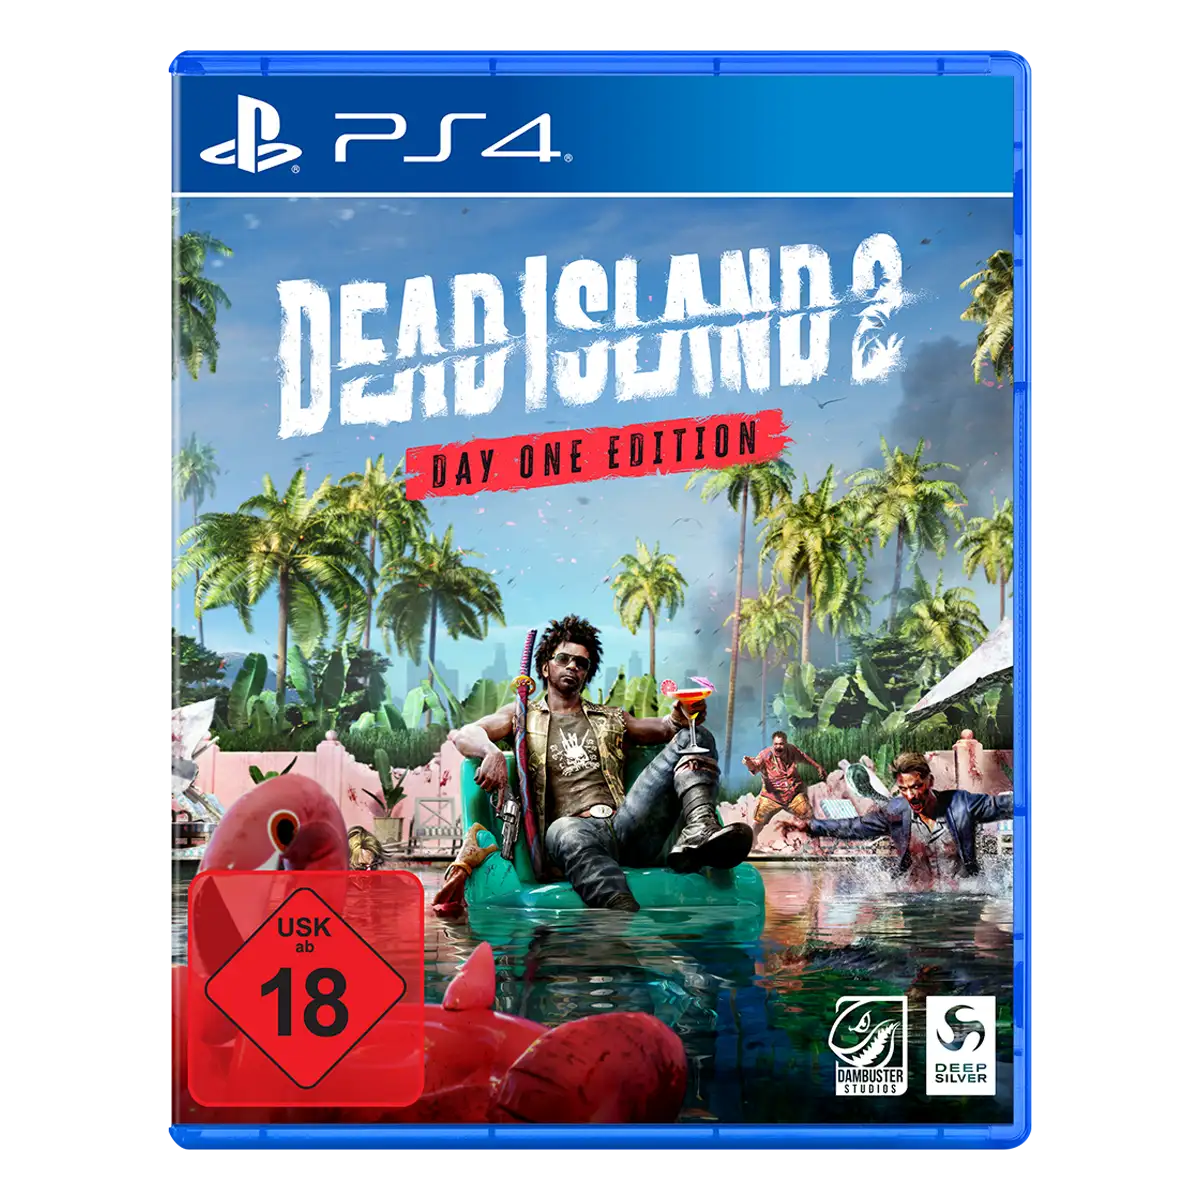 Dead Island 2 Day One Edition (PS4) (USK)